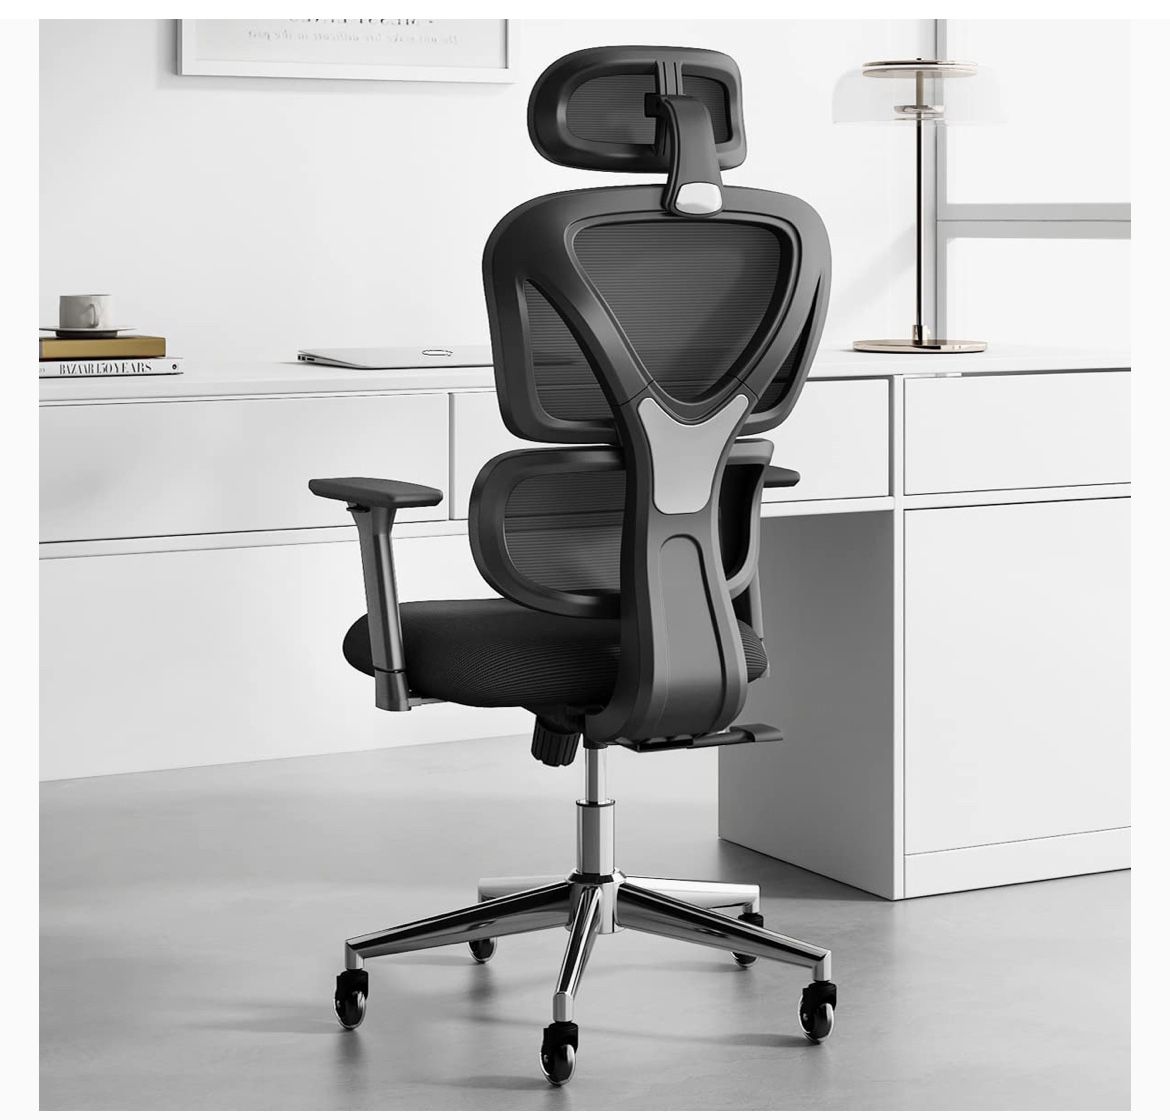 KERDOM Ergonomic Office Chair, Home Desk Chair, Comfy Breathable Mesh Task Chair, High Back Thick Cushion Computer Chair with Headrest and 3D Armrests